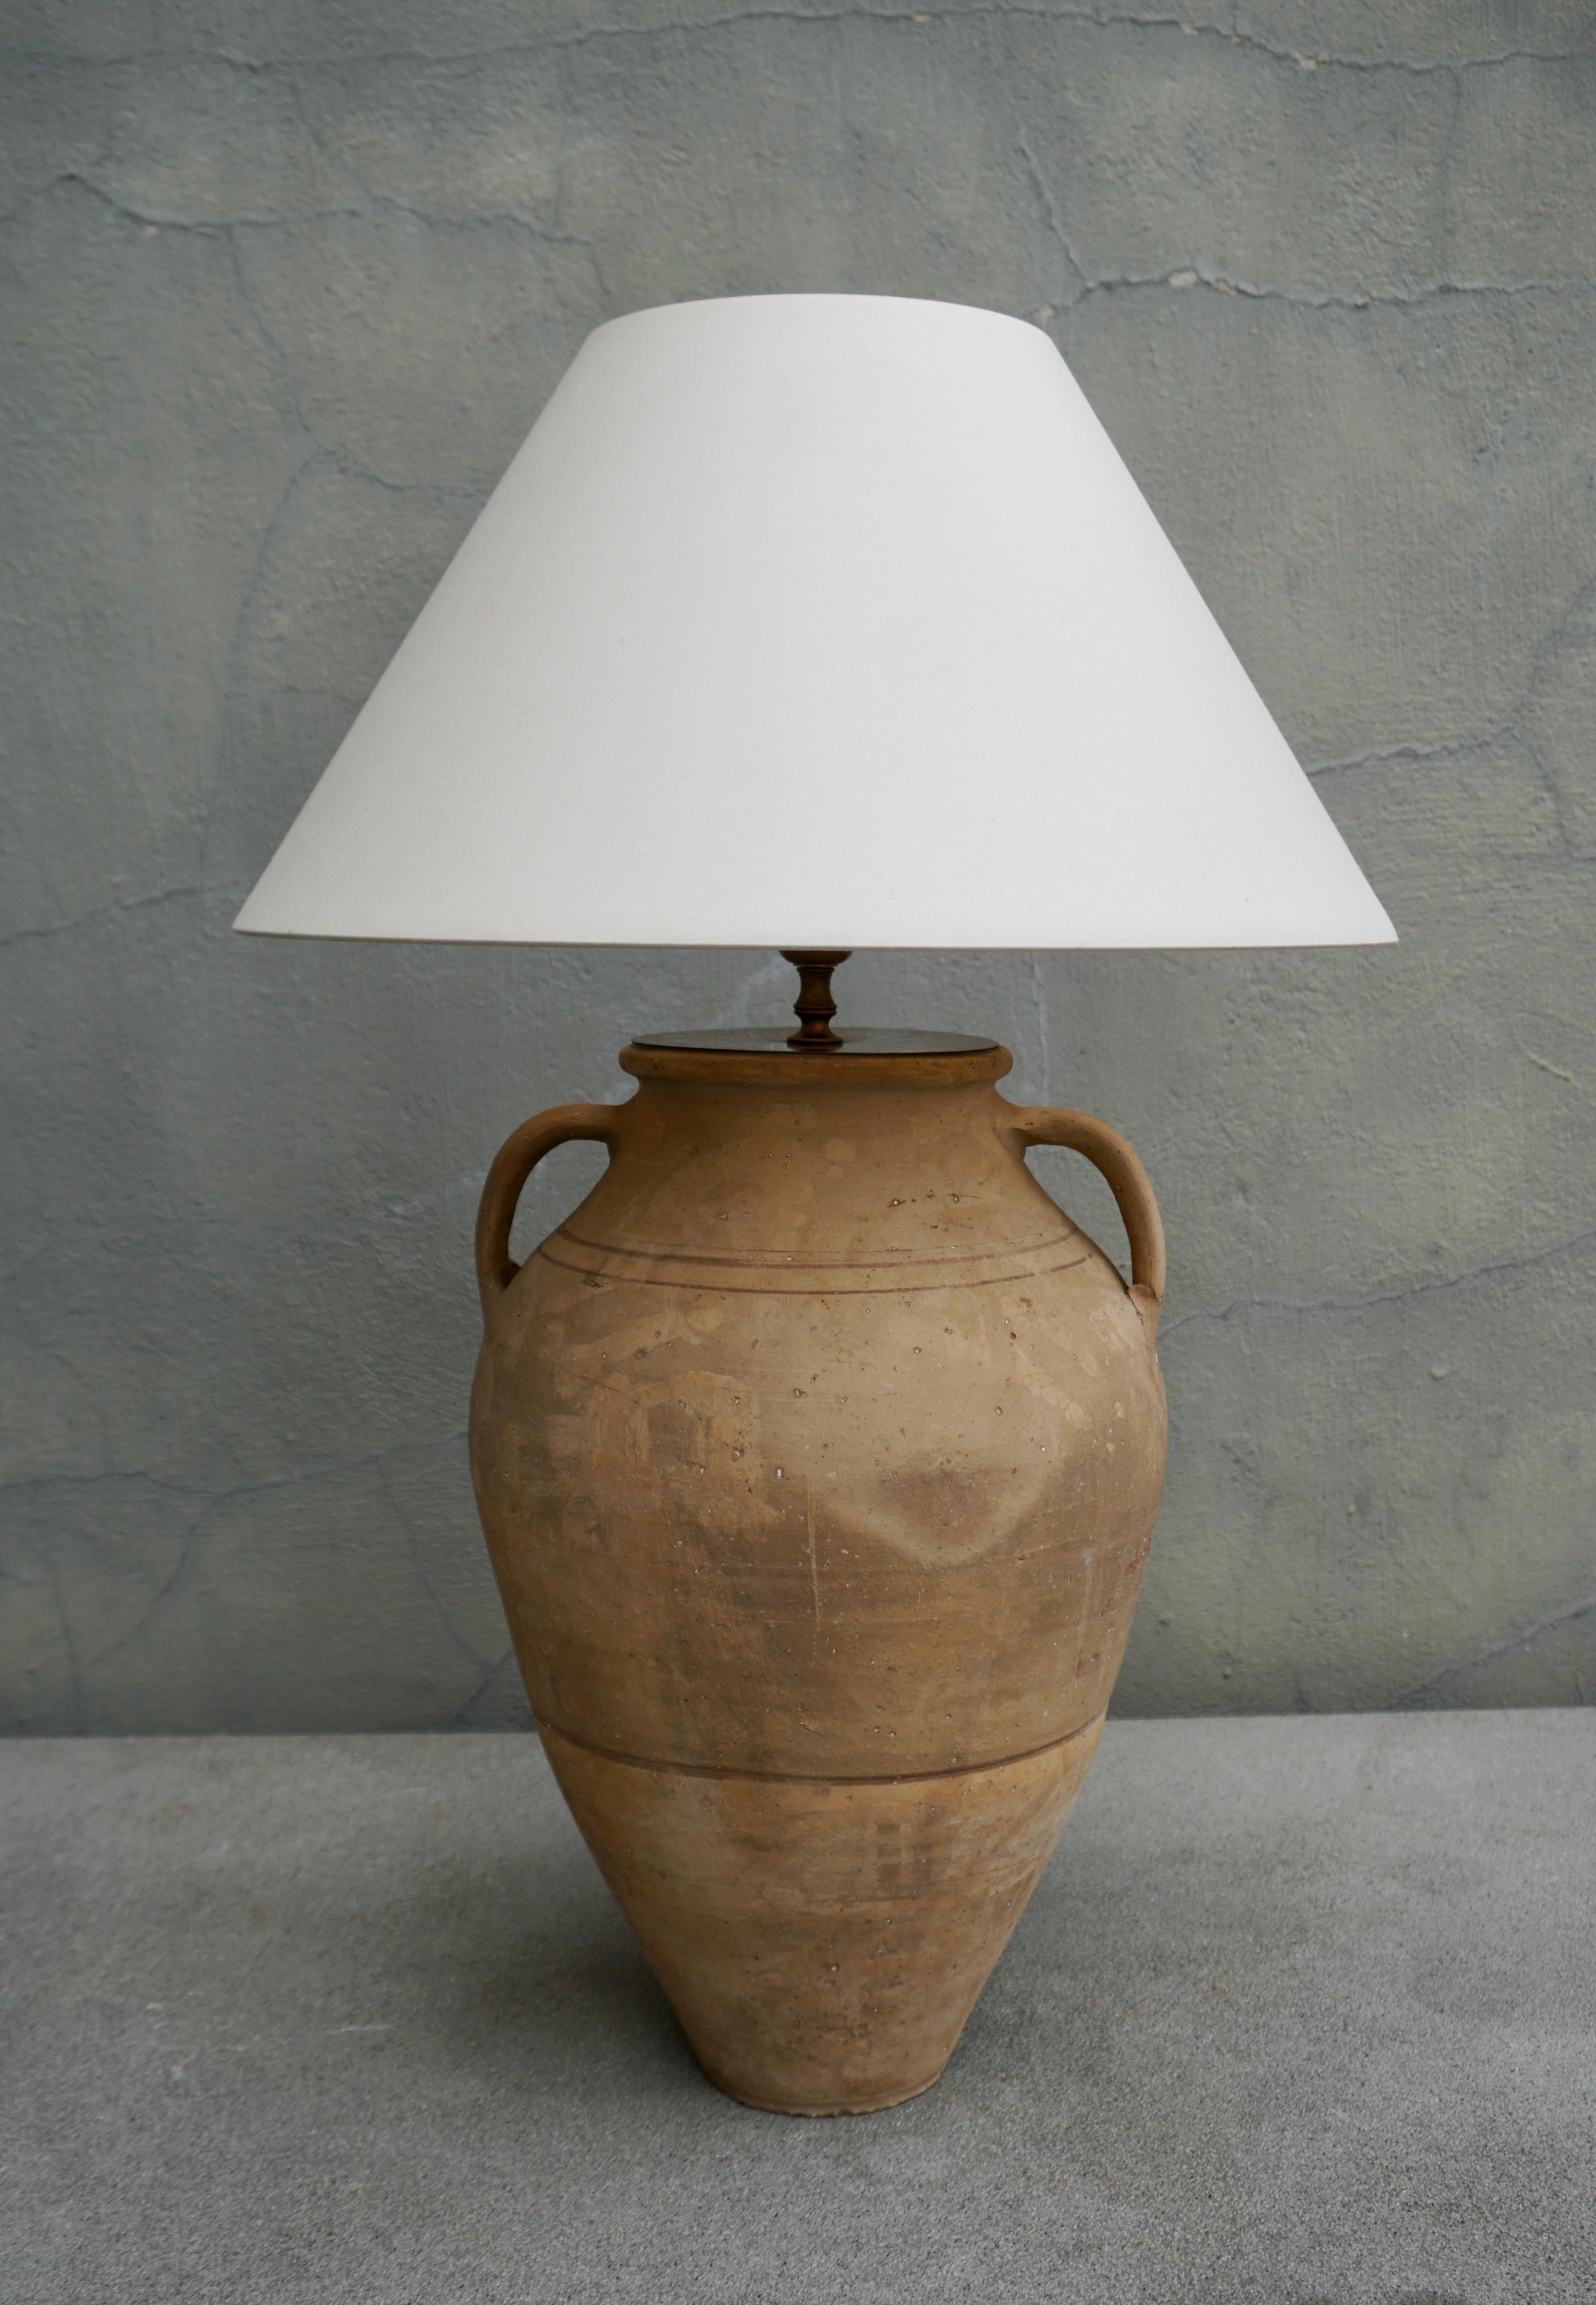 These amazing custom made living room lamps are made out of antique urns. Beautiful patina throughout the lamp and stems. Very chic. 

Height with shade 28.7